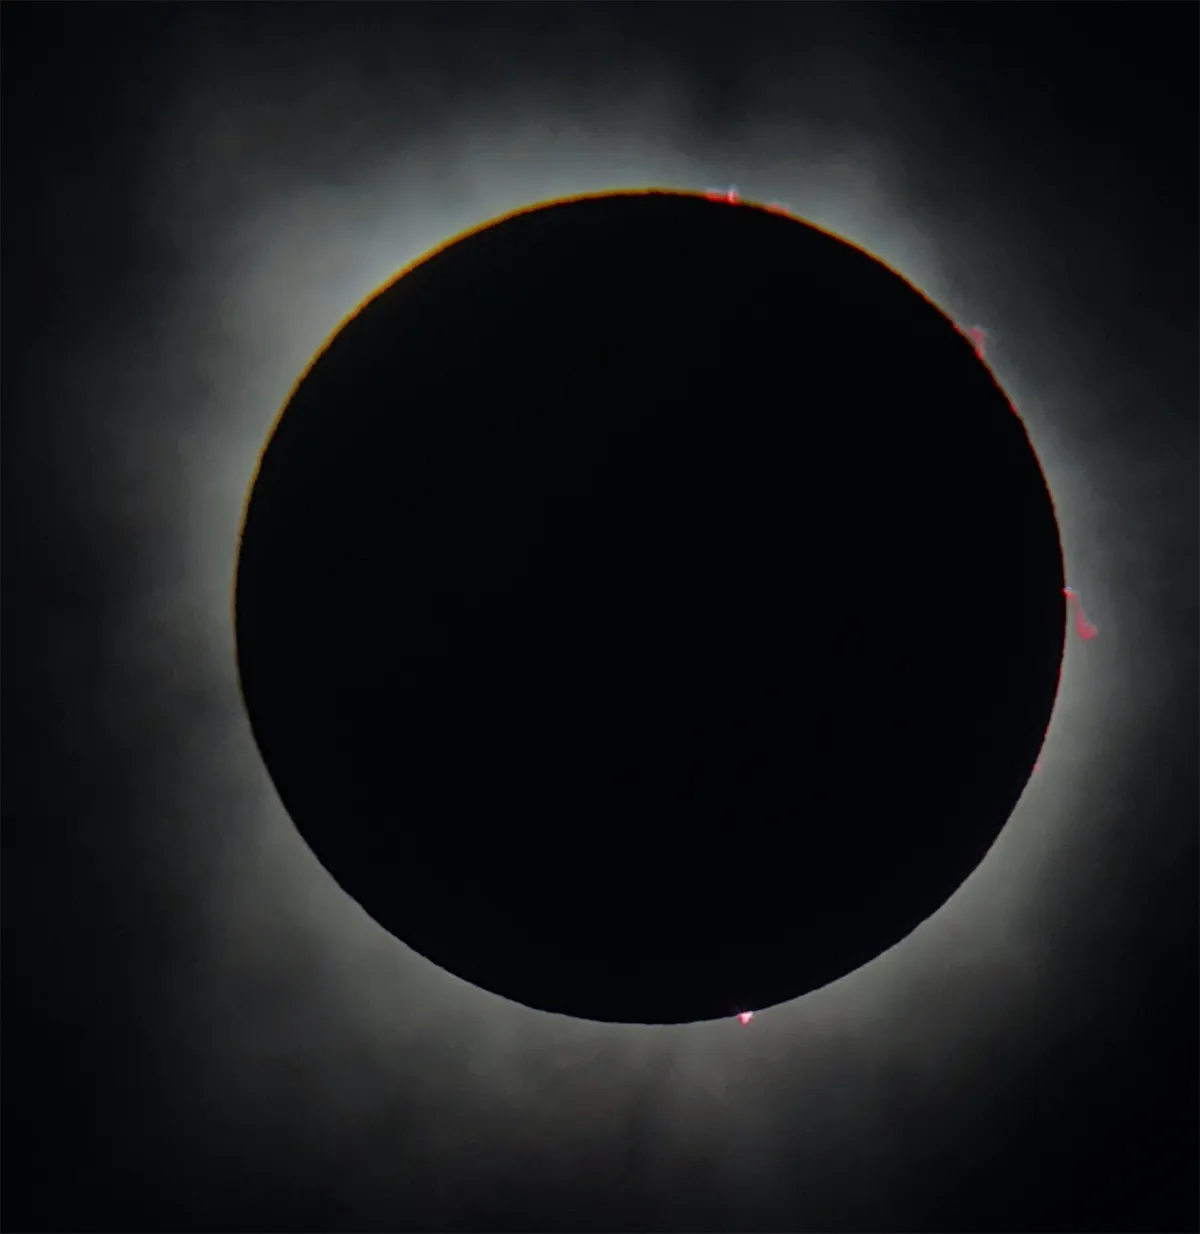 Conrad Sanders captured this image of the April 8 eclipse from Fort Worth, Texas, USA using a Lunt 60mm telescope with Seymour Solar Filter and iPhone through the eyepiece.